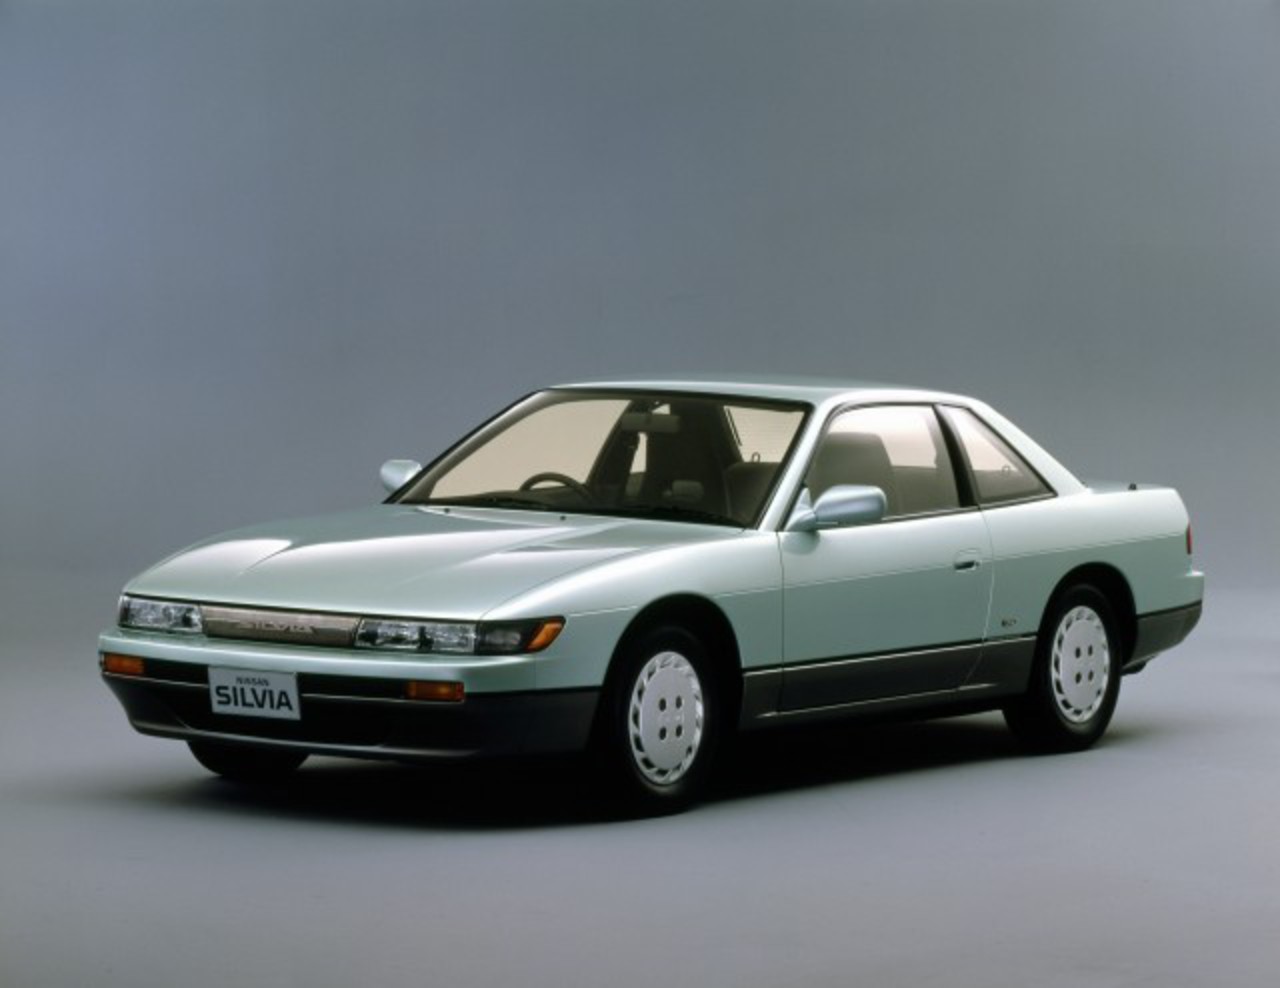 Nissan-Silvia-Qs. It's 2013, and that means a new lineup of vehicles has